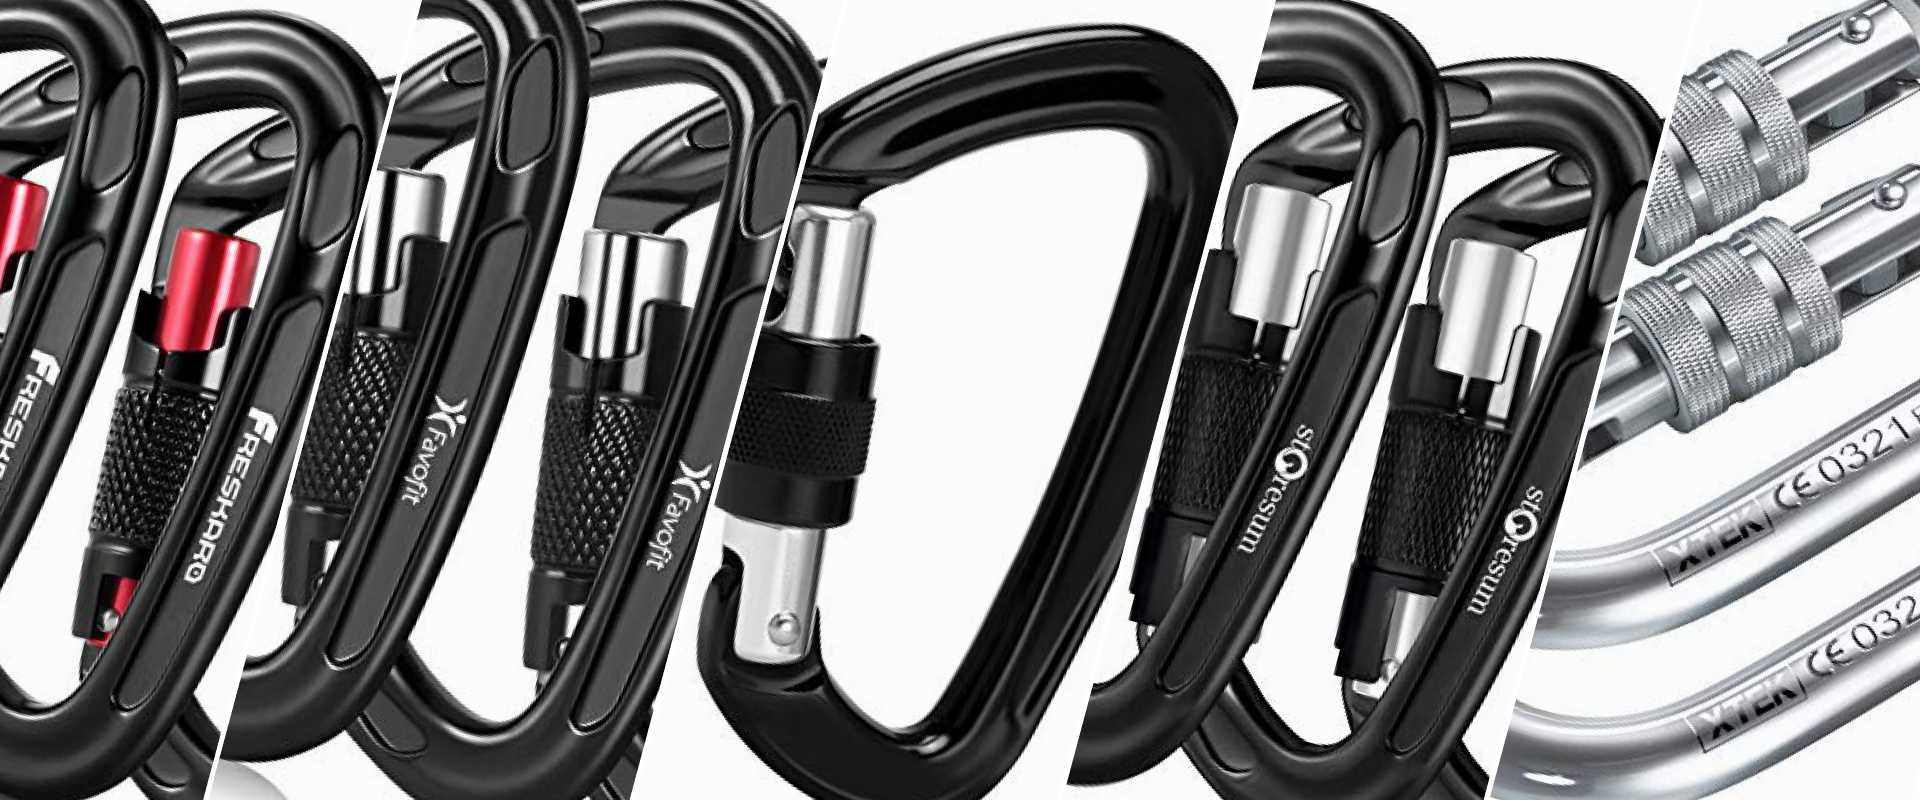 1 pk O-Shaped Steel Climbing Carabiner 25kn=5600lb Screw Lock Spring Gate Protection,CE Rated Heavy Duty Carabiners For Rock Climbing etc.